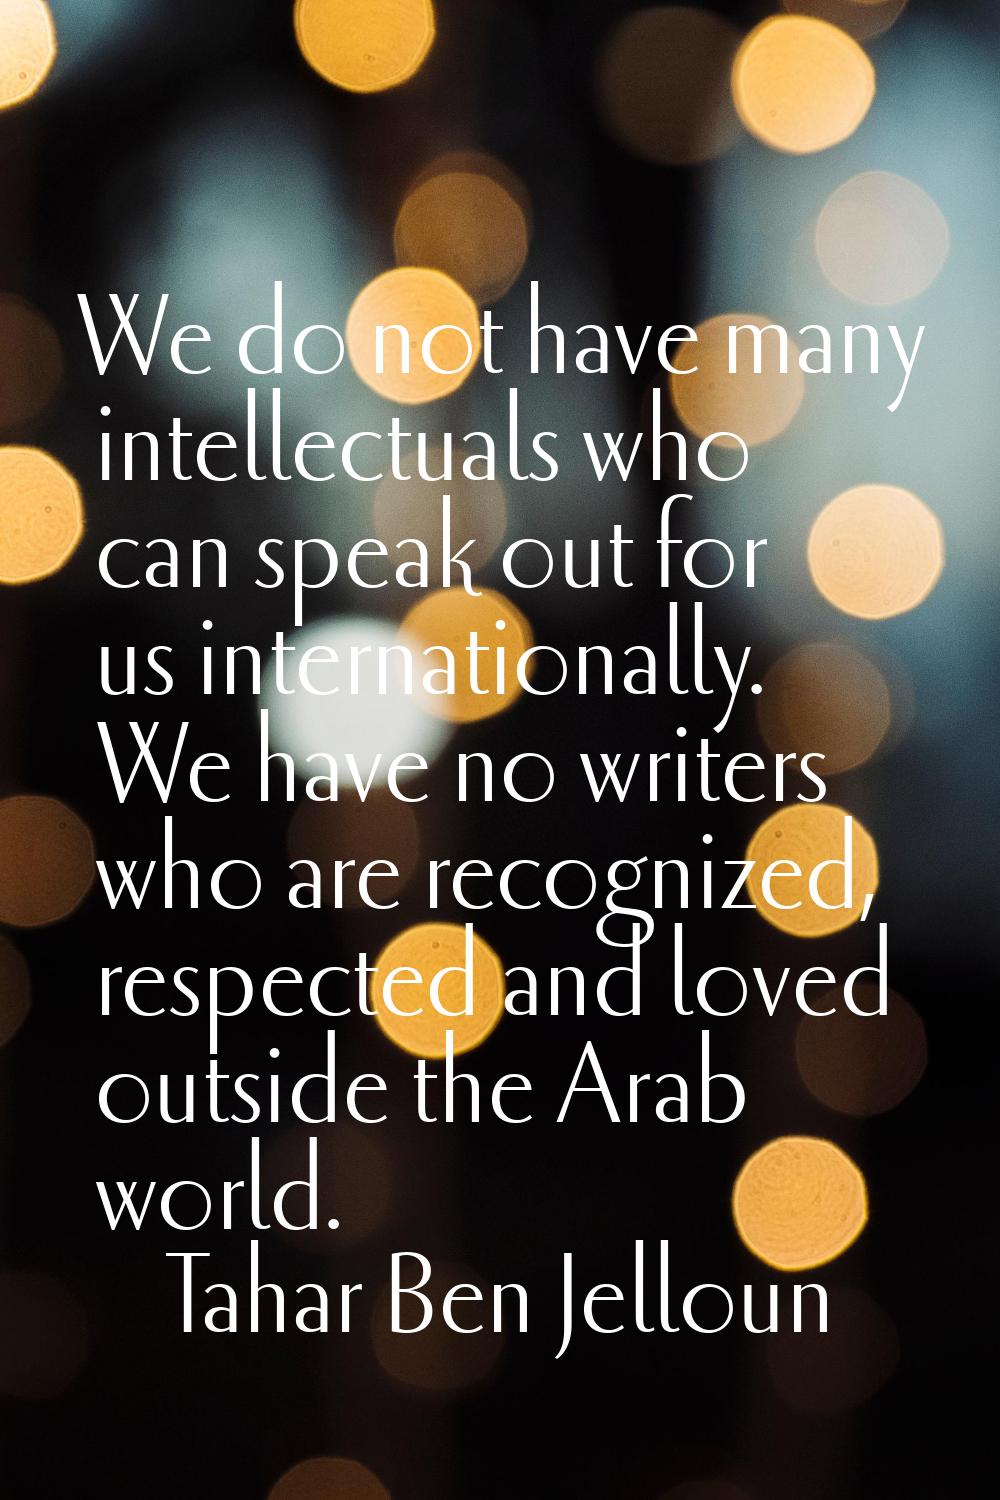 We do not have many intellectuals who can speak out for us internationally. We have no writers who 